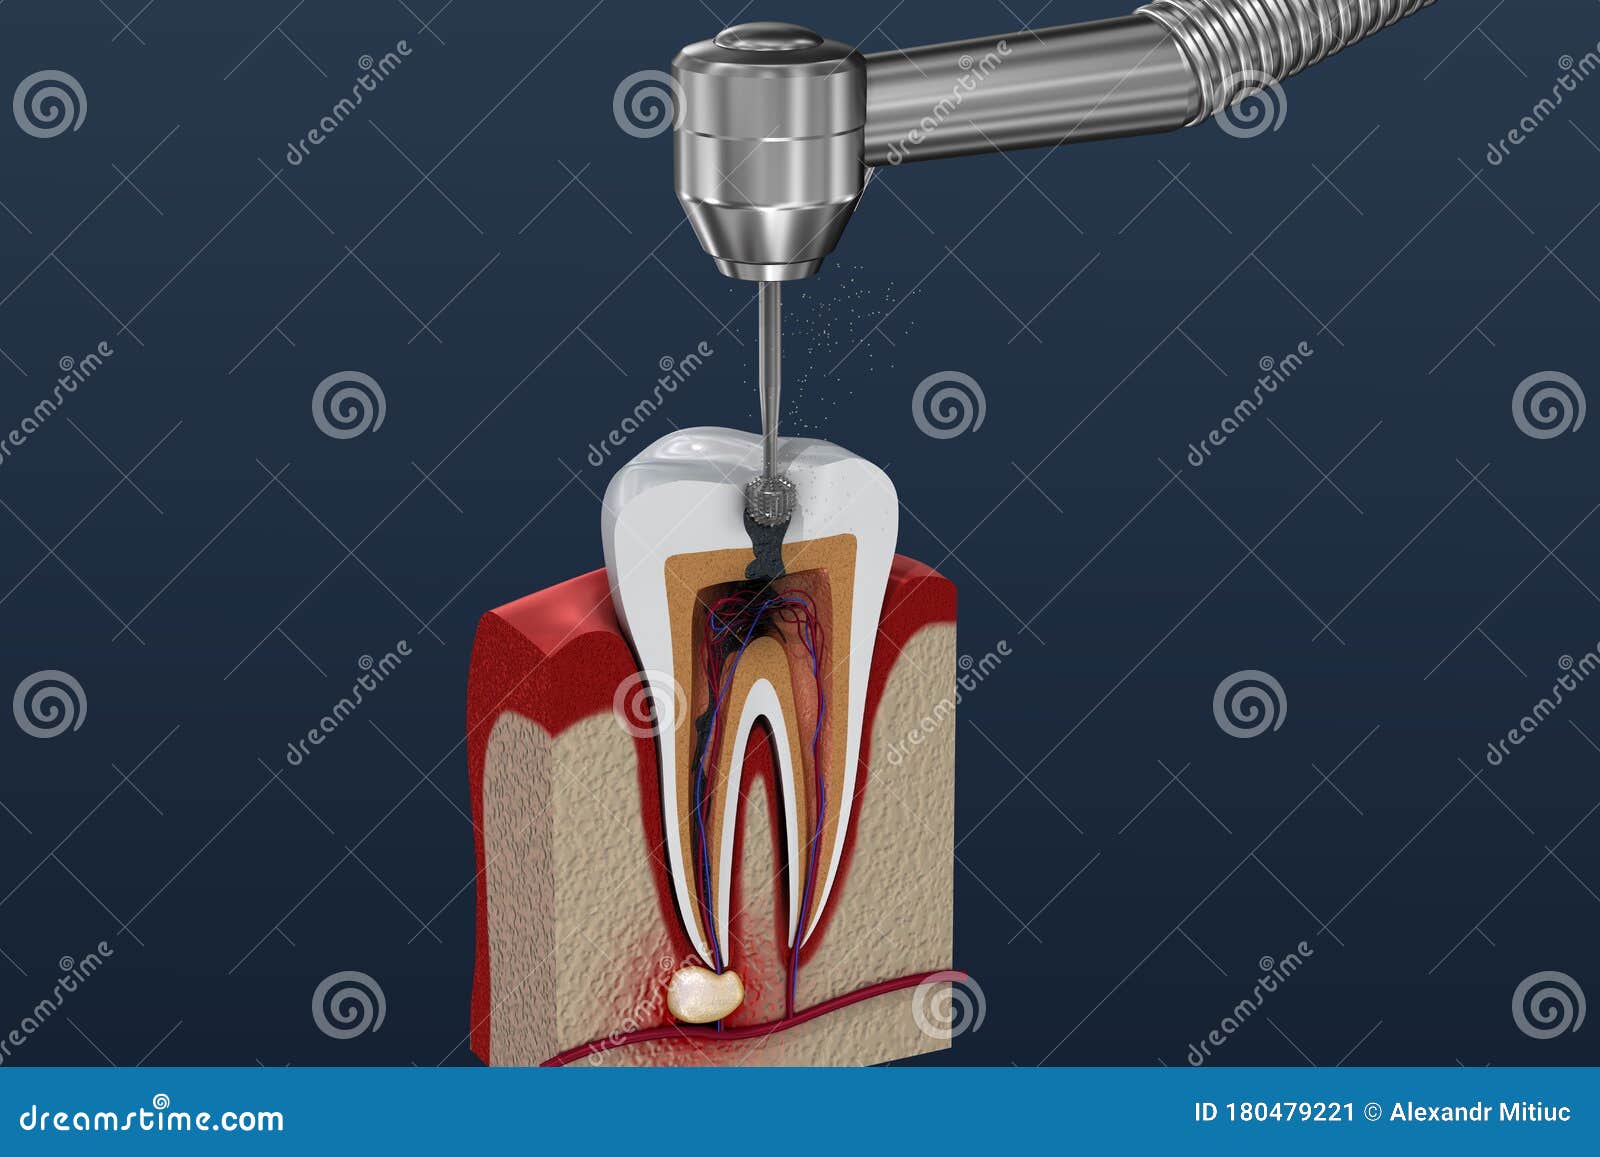 root canal treatment process. 